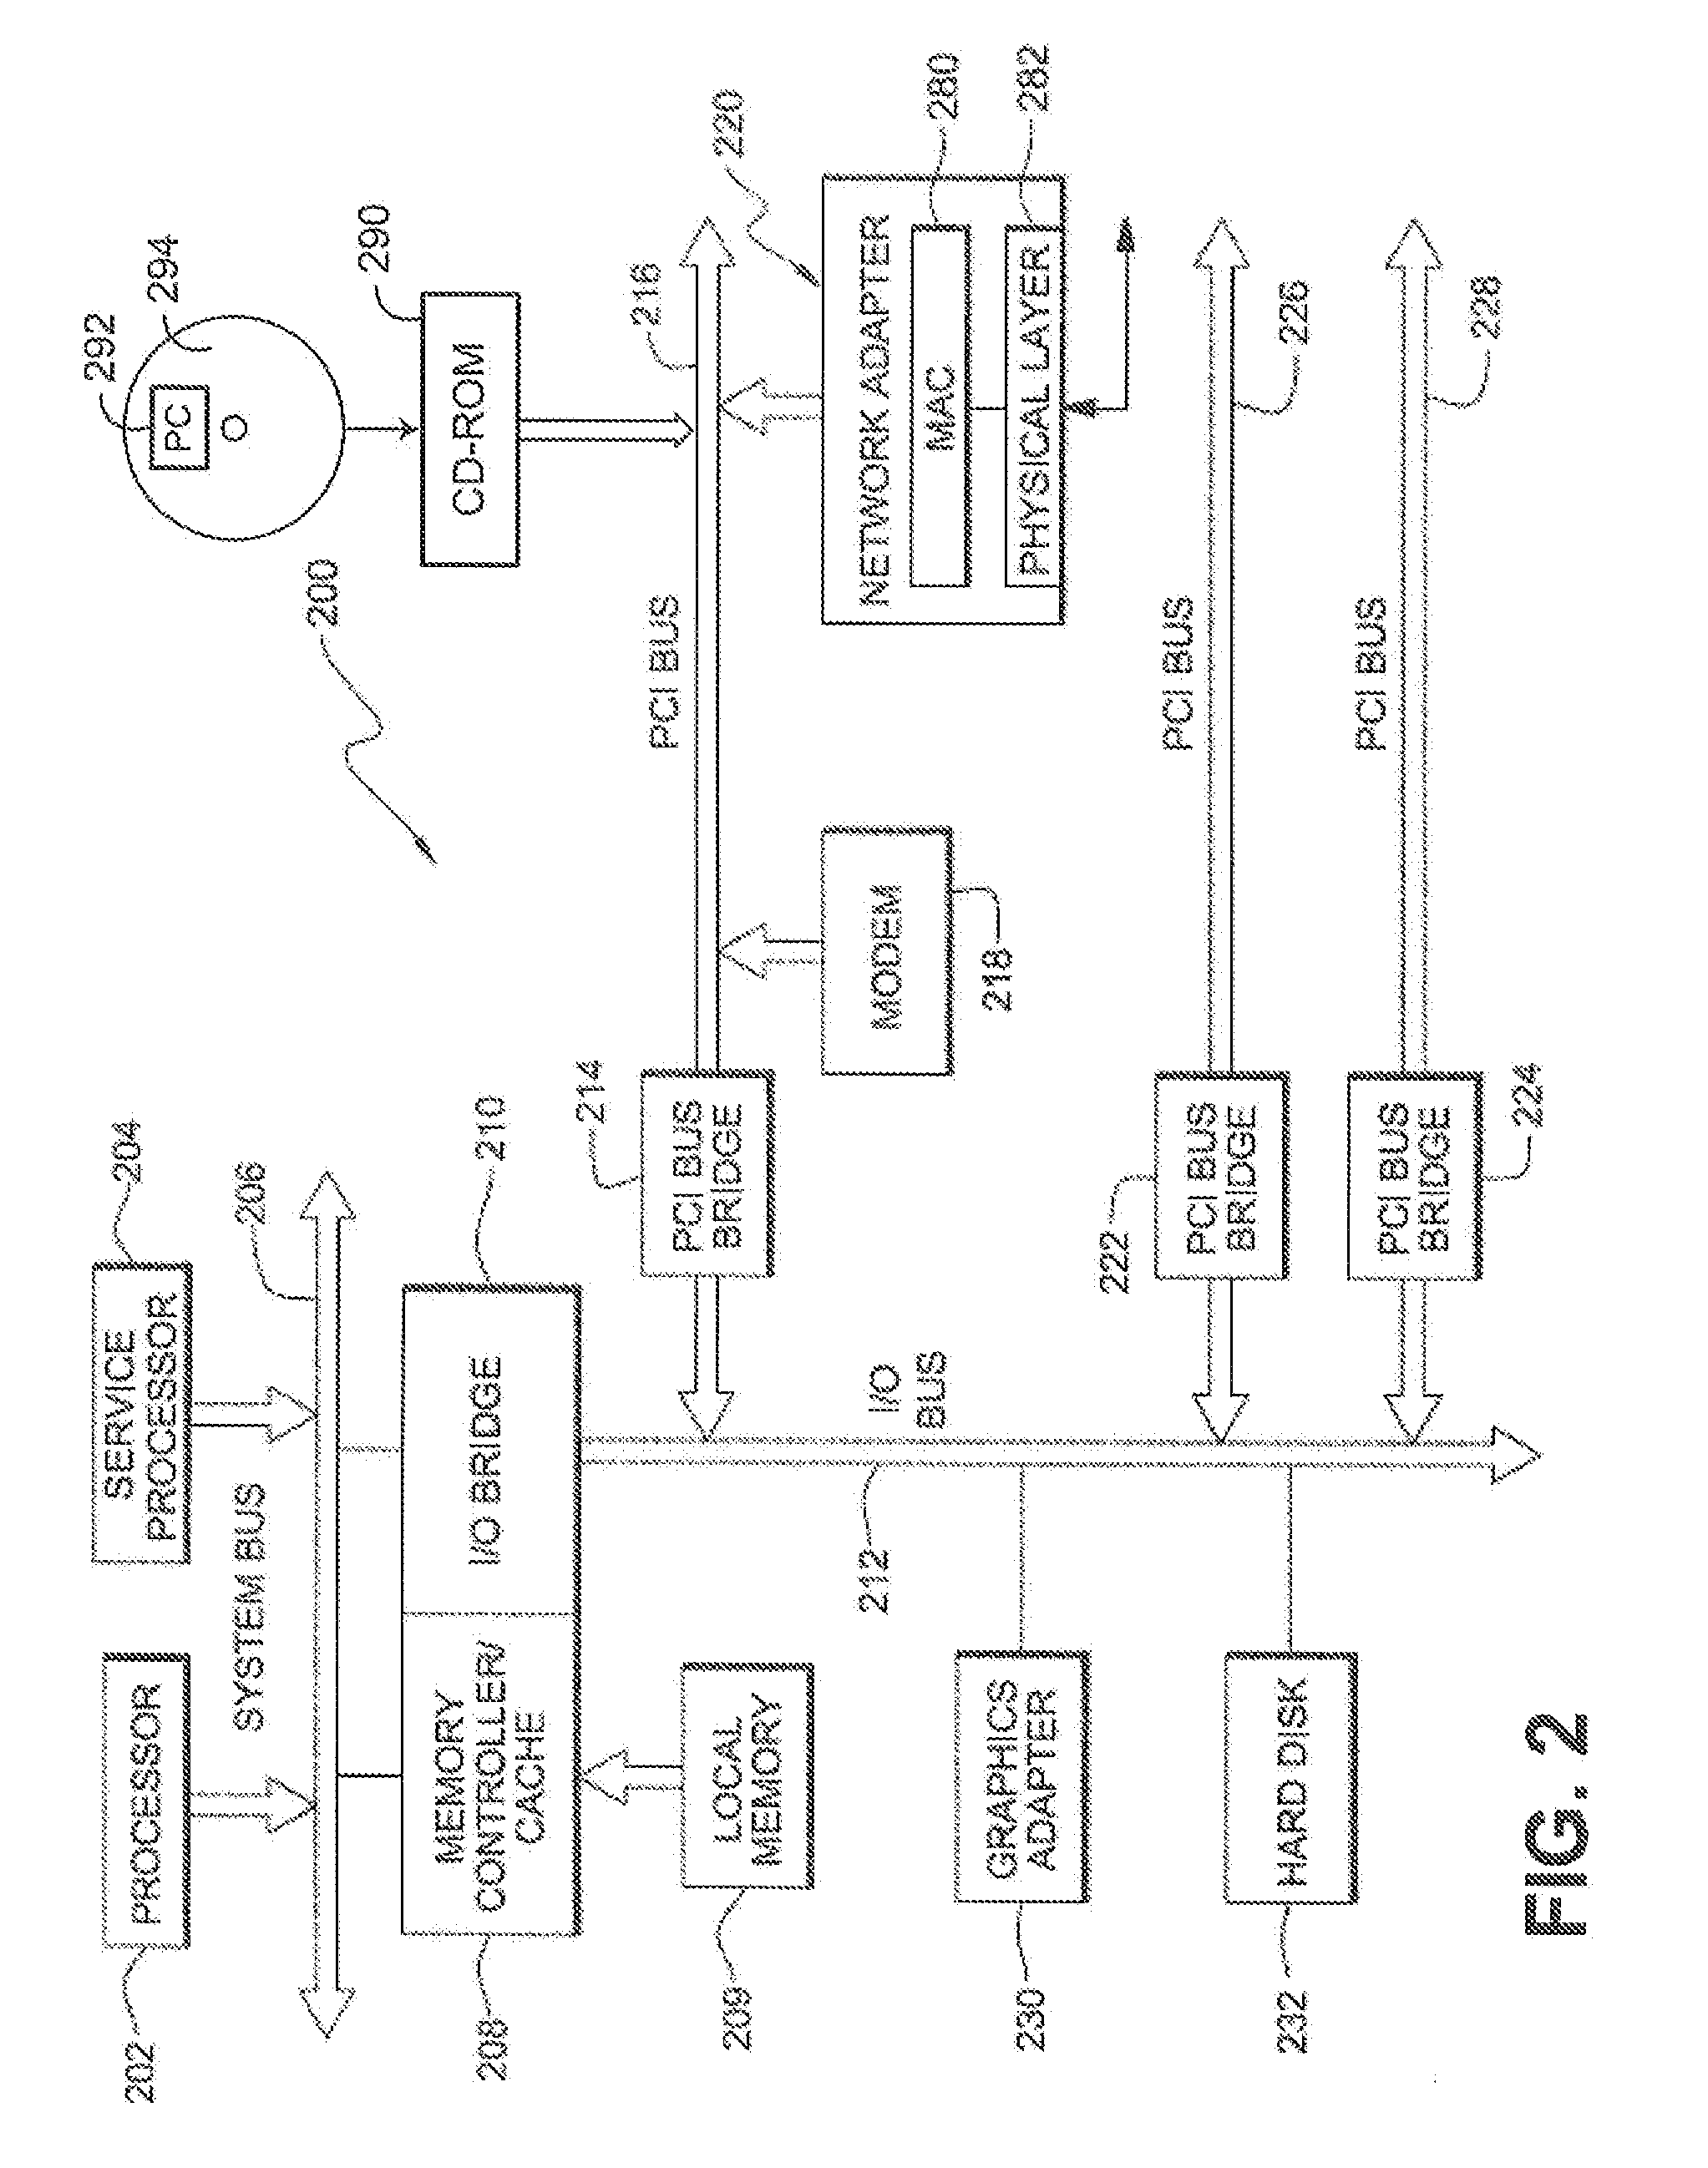 Vendor-independent resource configuration interface for self-virtualizing input/output device